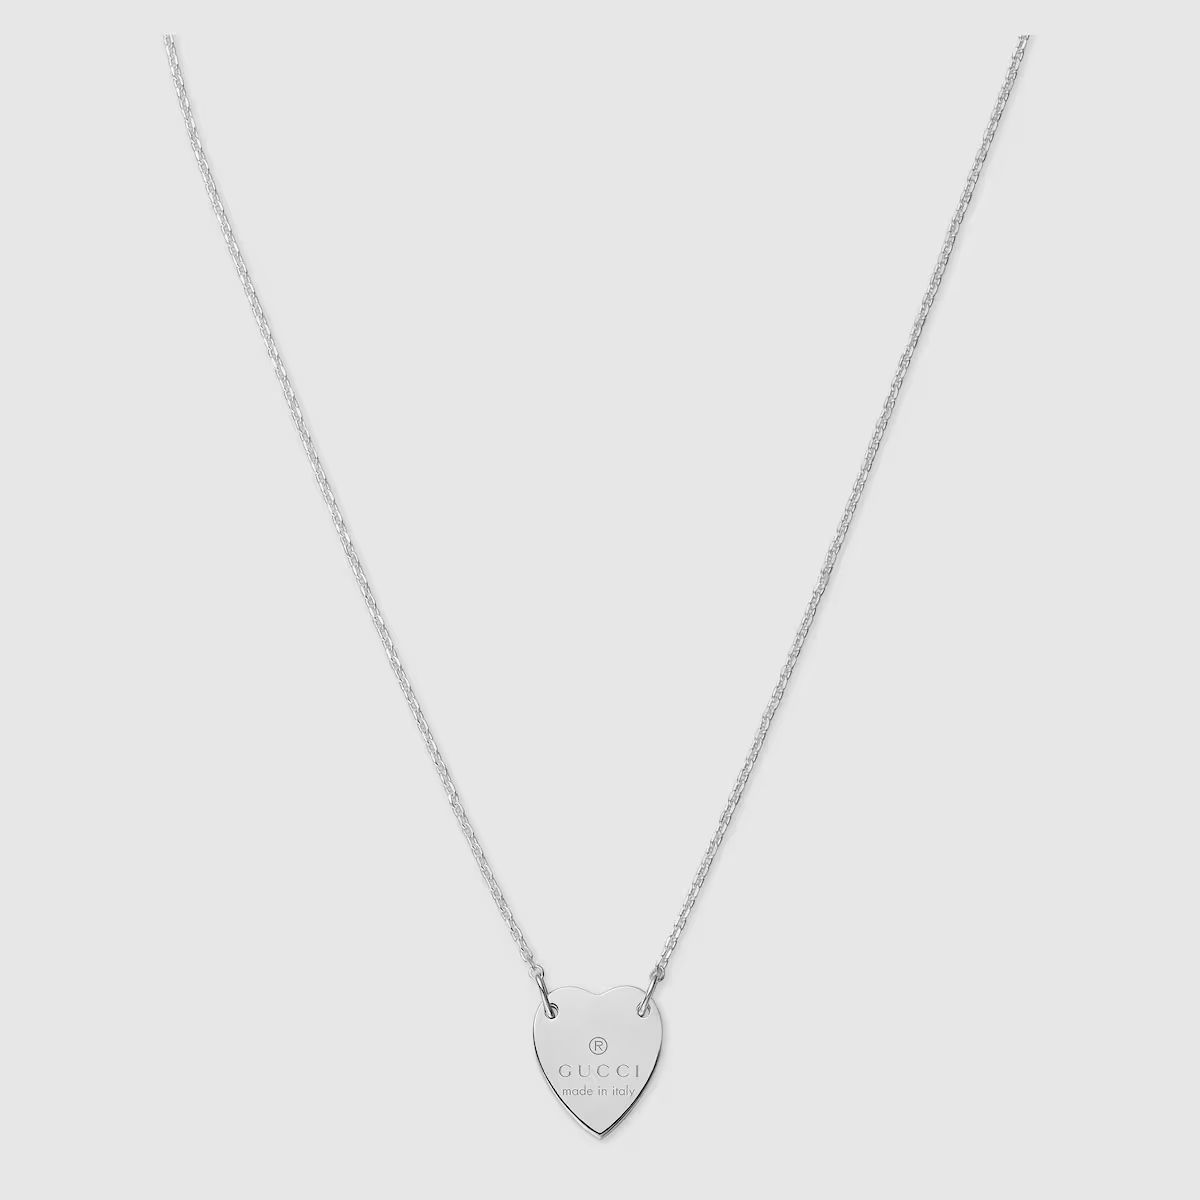 Gucci - Heart necklace with Gucci trademark | Gucci (US)